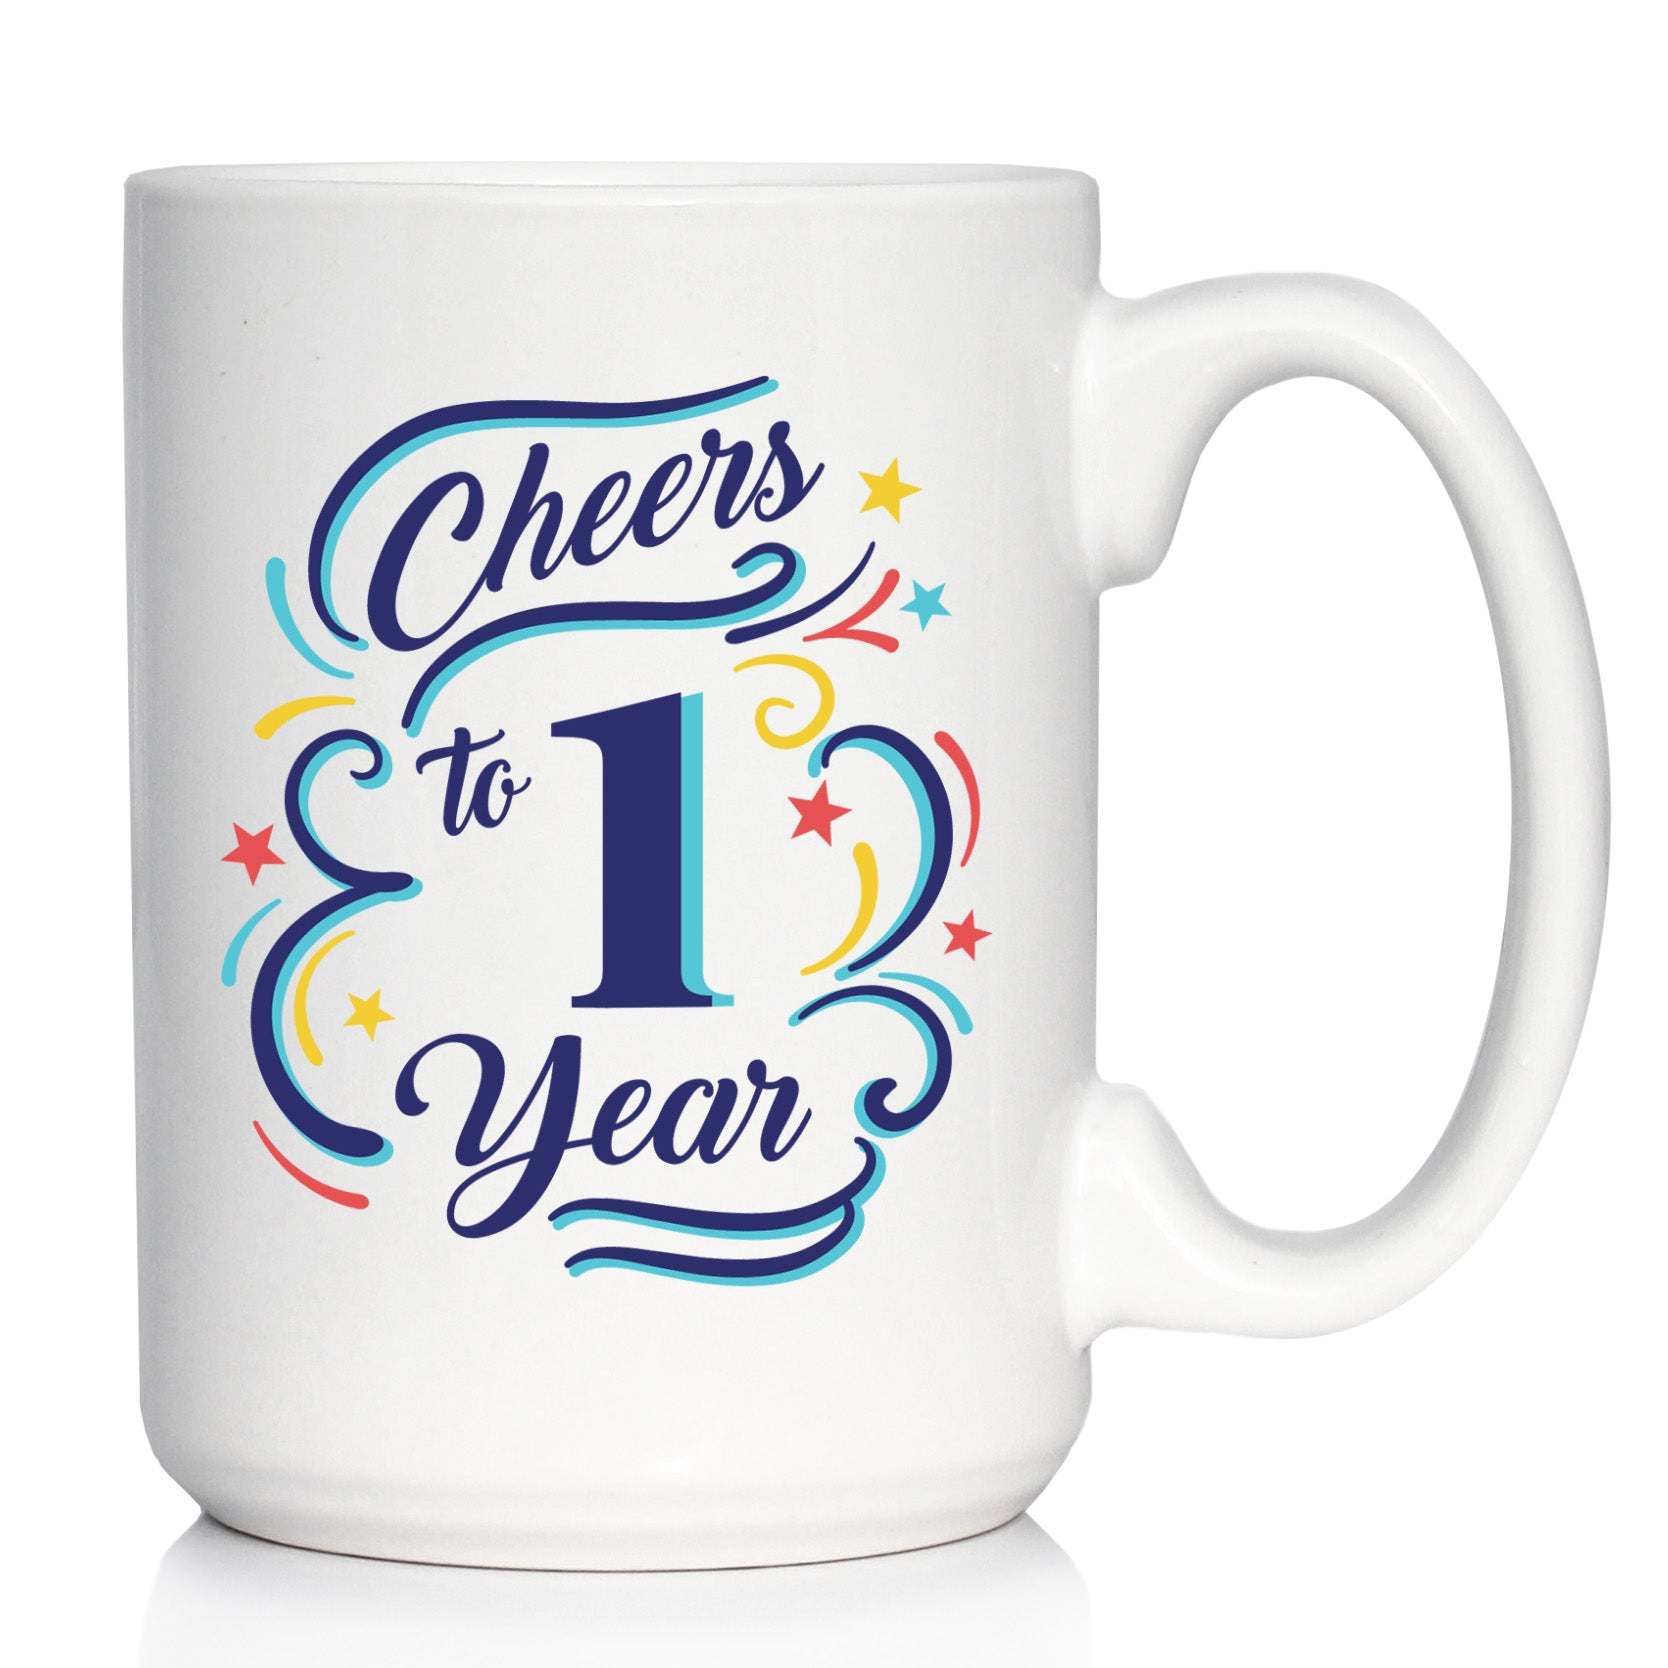 Cheers to 1 Year - Coffee Mug Gifts for Women & Men - 1st Anniversary Party Decor